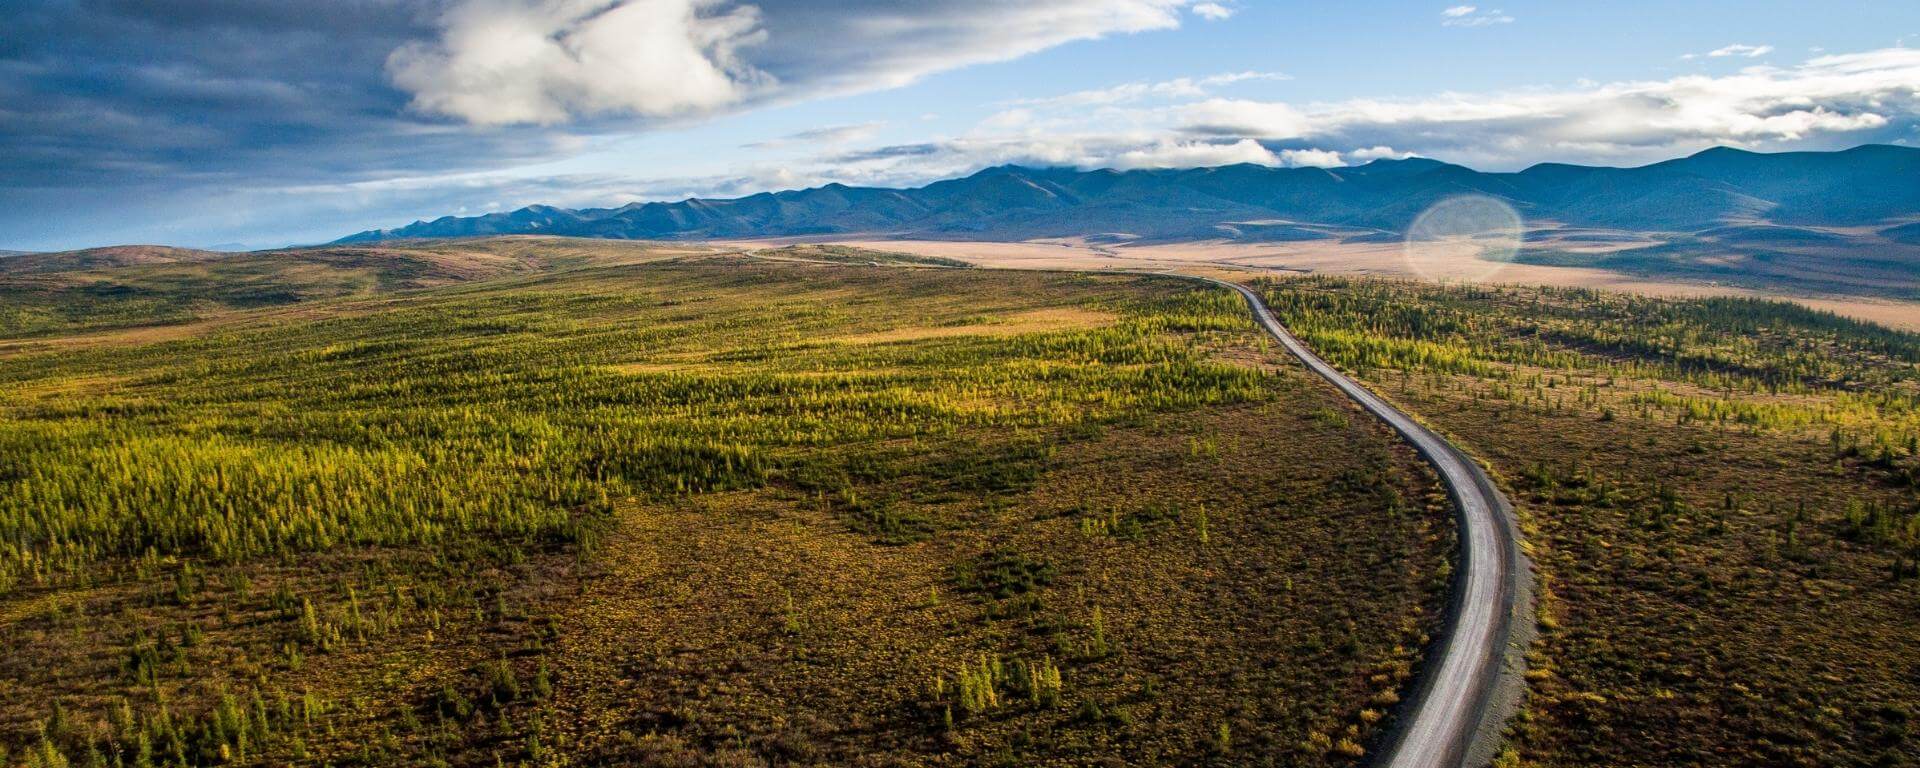 Arctic Ocean Dreams and the Dempster Highway